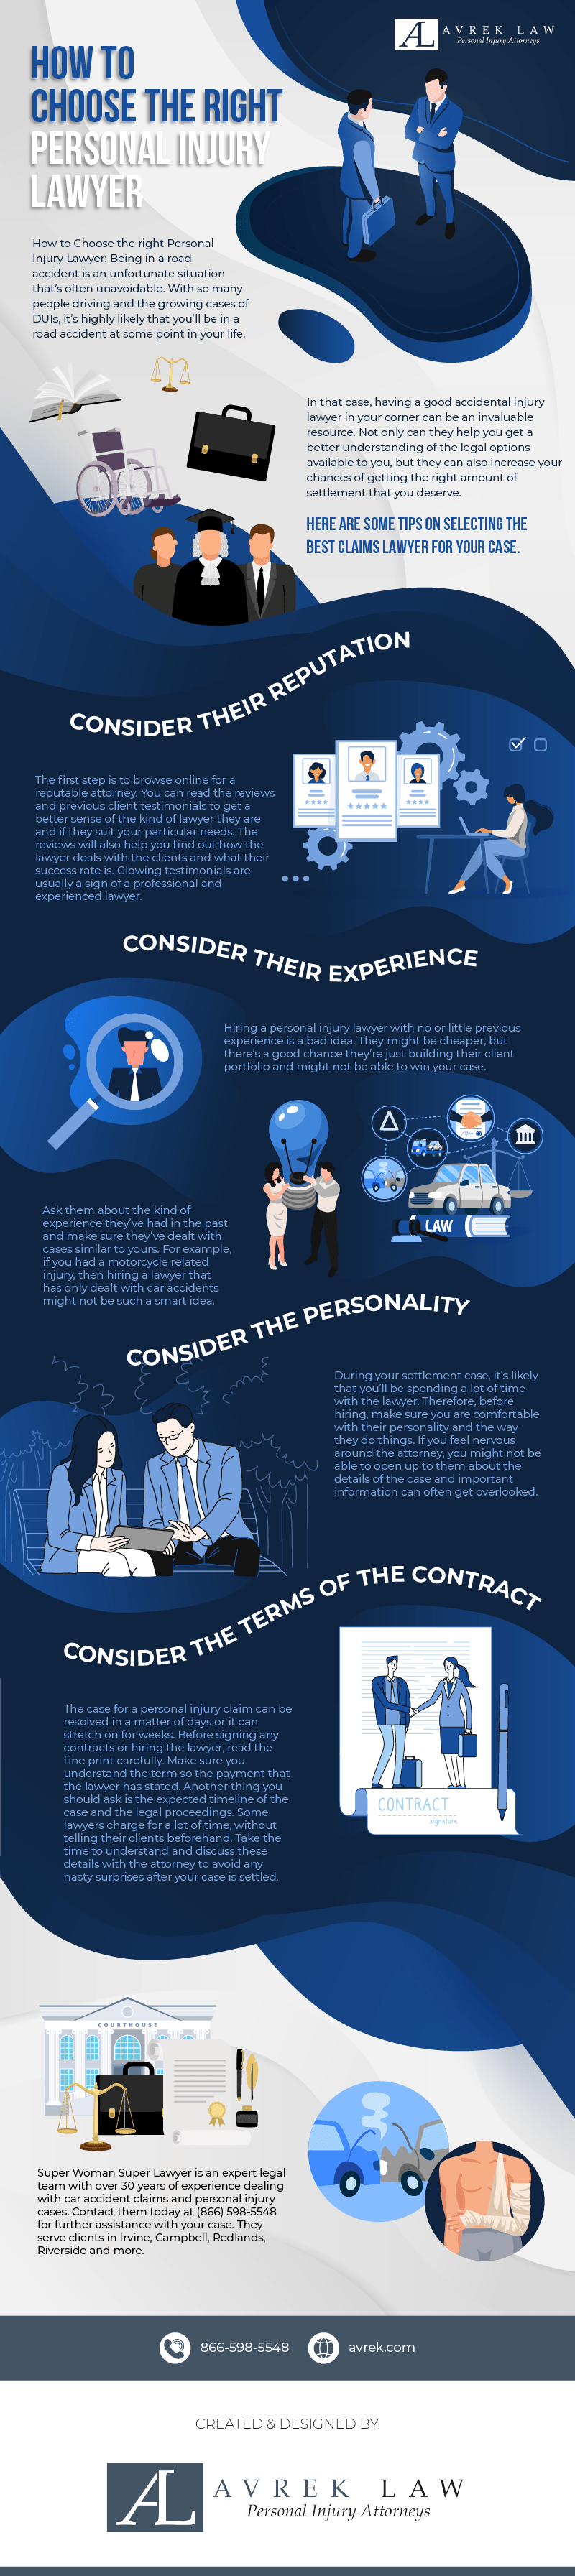 Infographic - How to choose the right personal injury lawyer